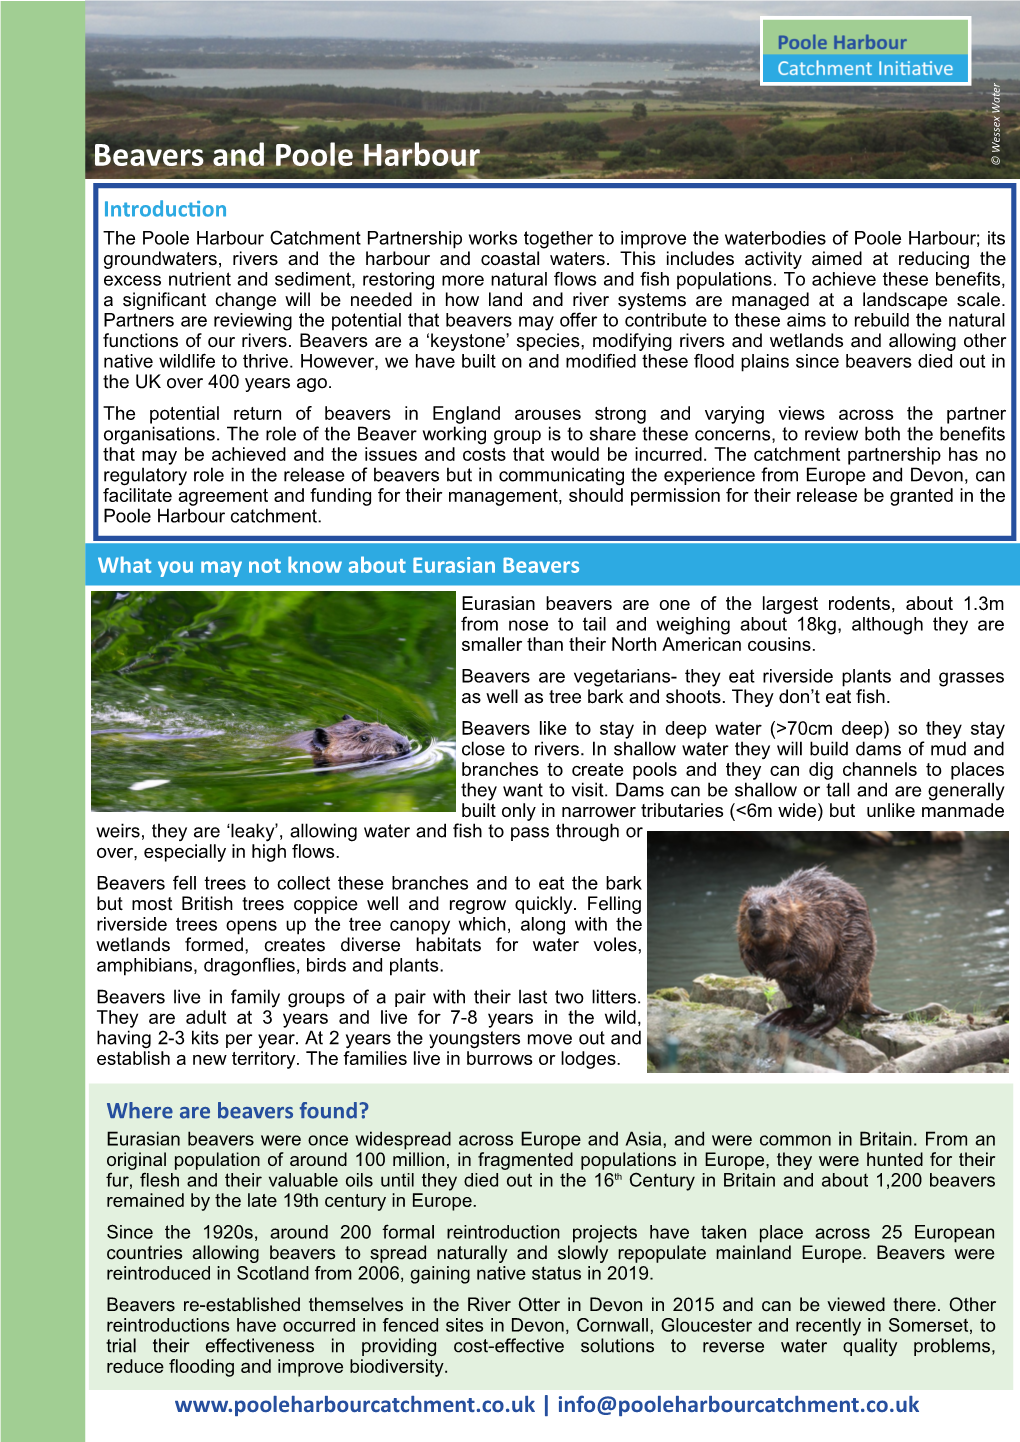 Beavers and Poole Harbour